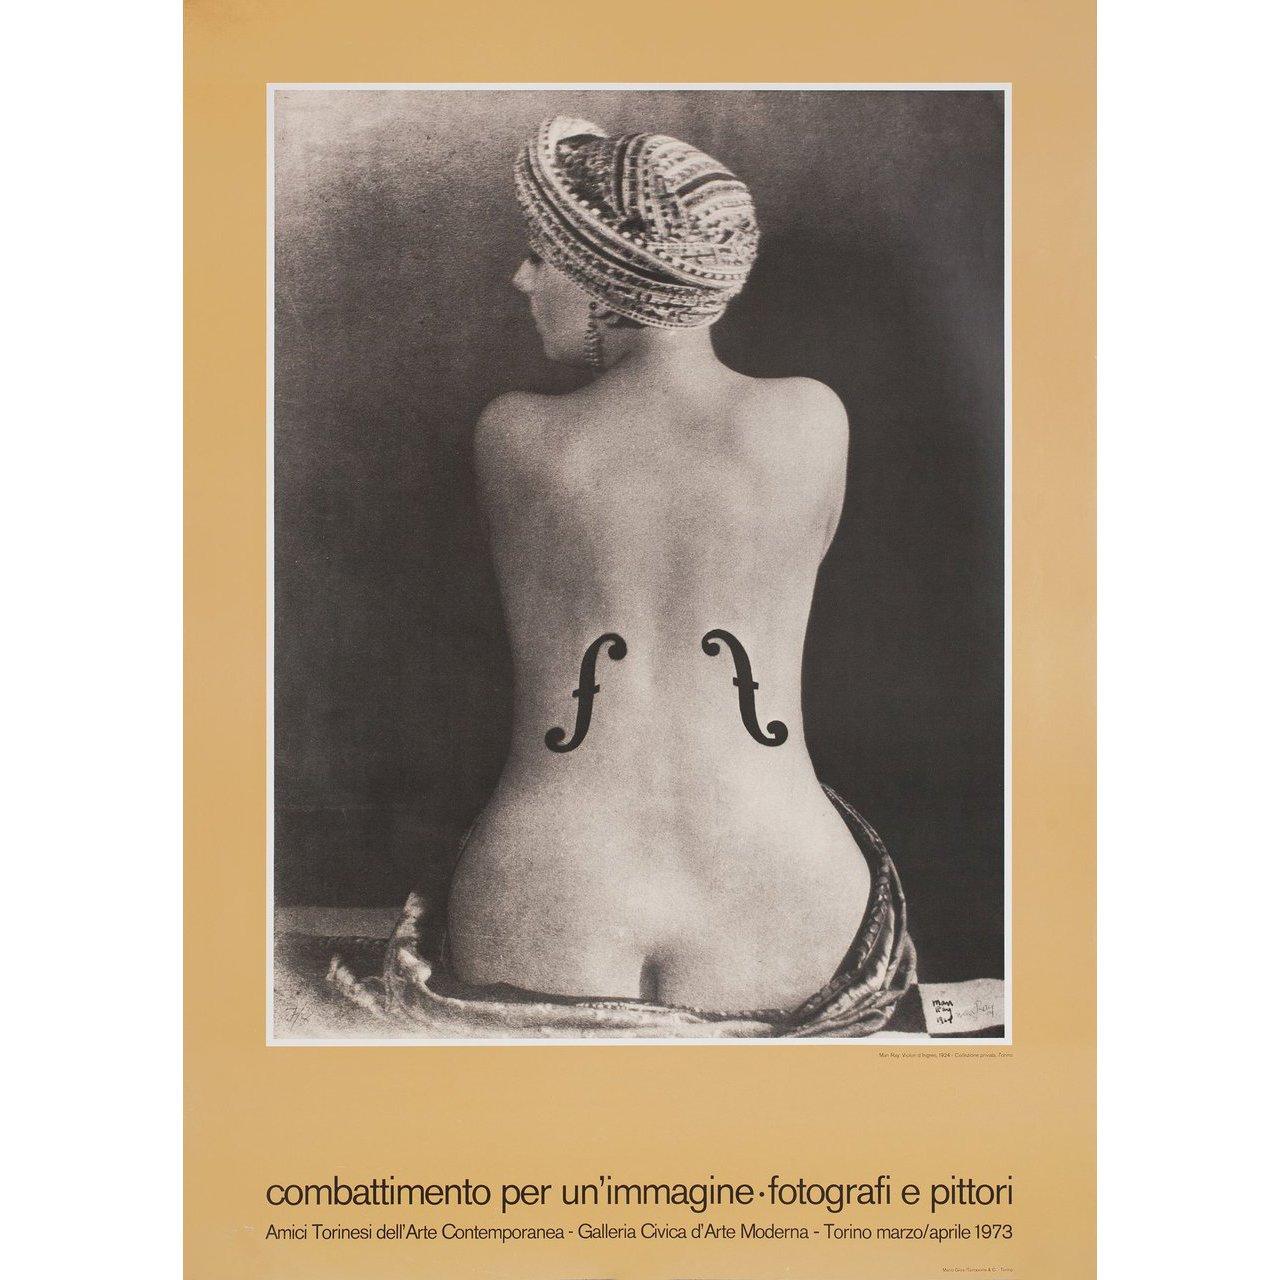 Original 1974 Italian poster by Man Ray for the exhibition Man Ray: Combattimento per un'immagine-photografi e pittori. Very Good-Fine condition, rolled. Please note: the size is stated in inches and the actual size can vary by an inch or more.